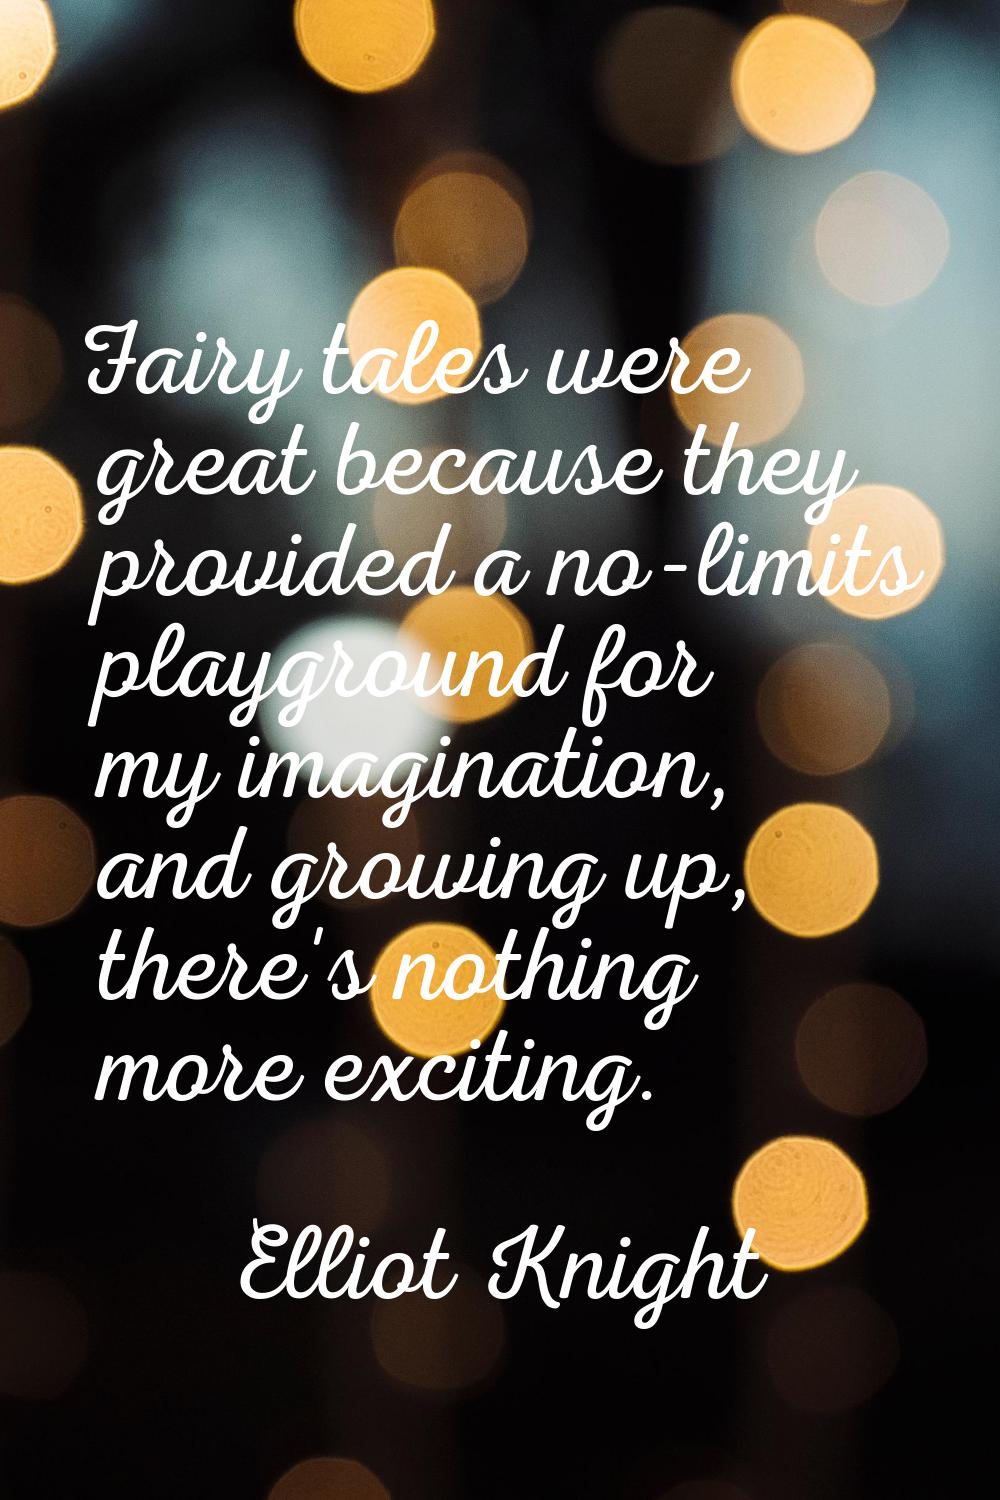 Fairy tales were great because they provided a no-limits playground for my imagination, and growing